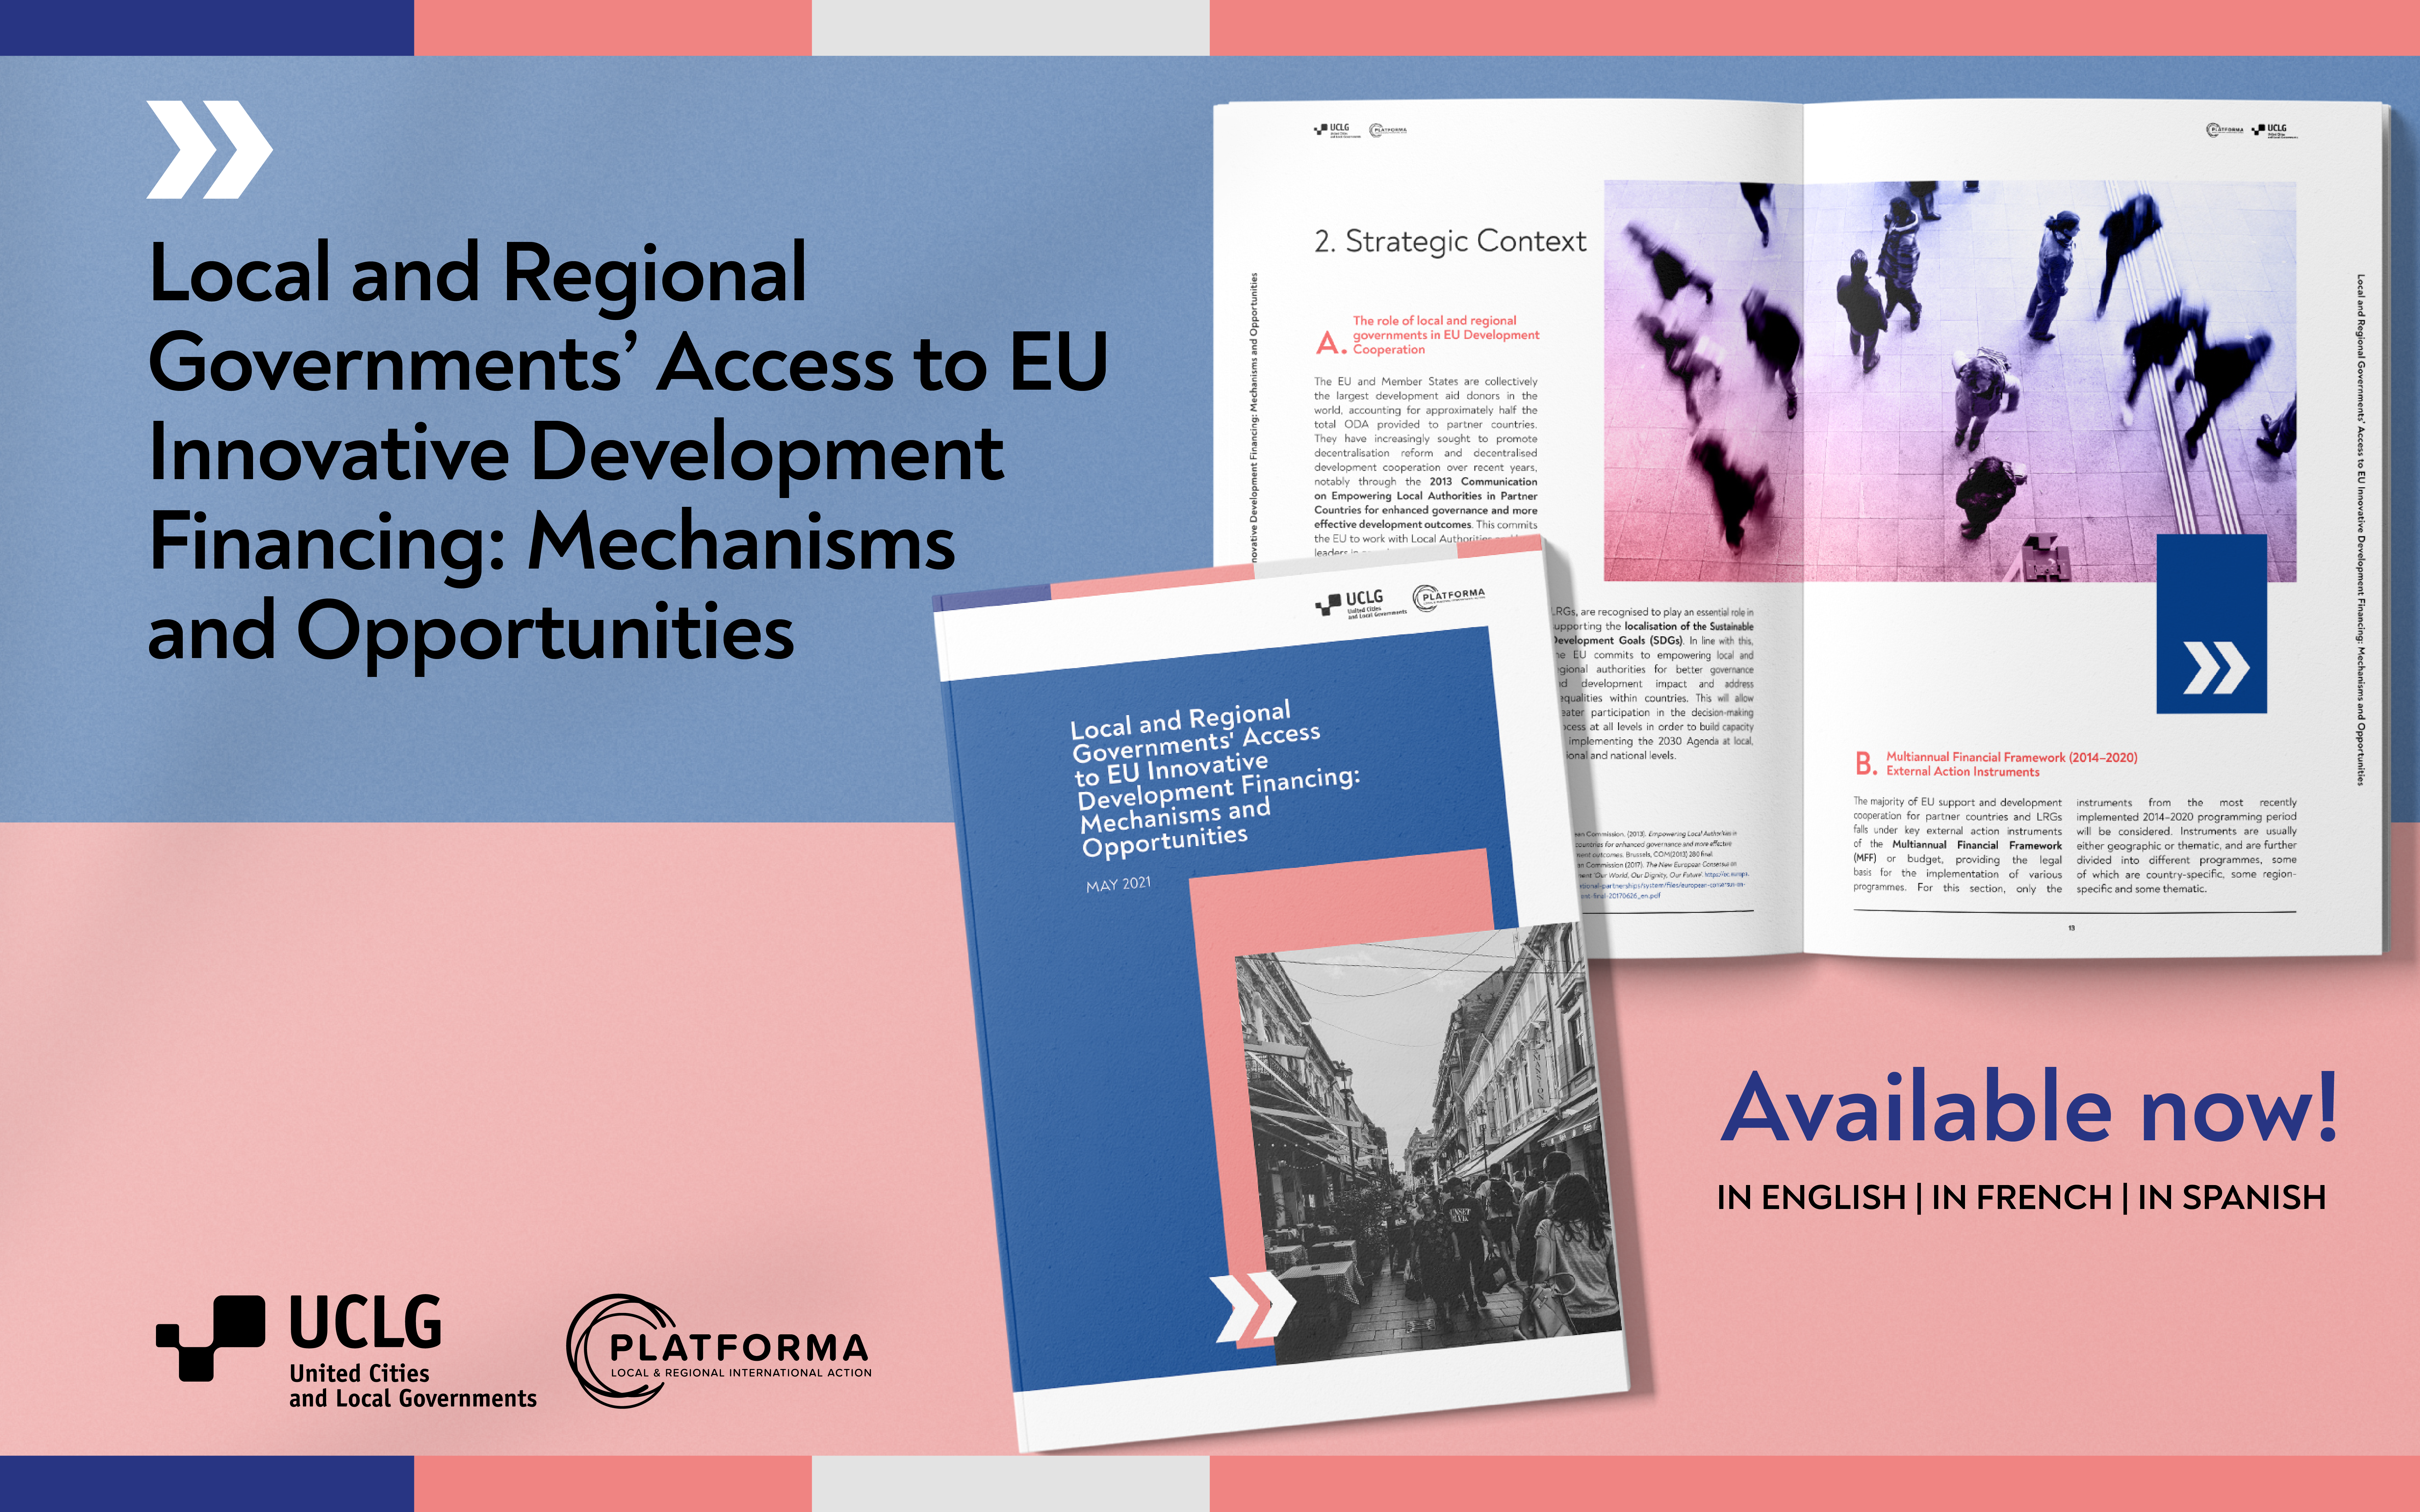 Local and Regional Governments’ Access to EU Innovative Development Financing: Mechanisms and Opportunities